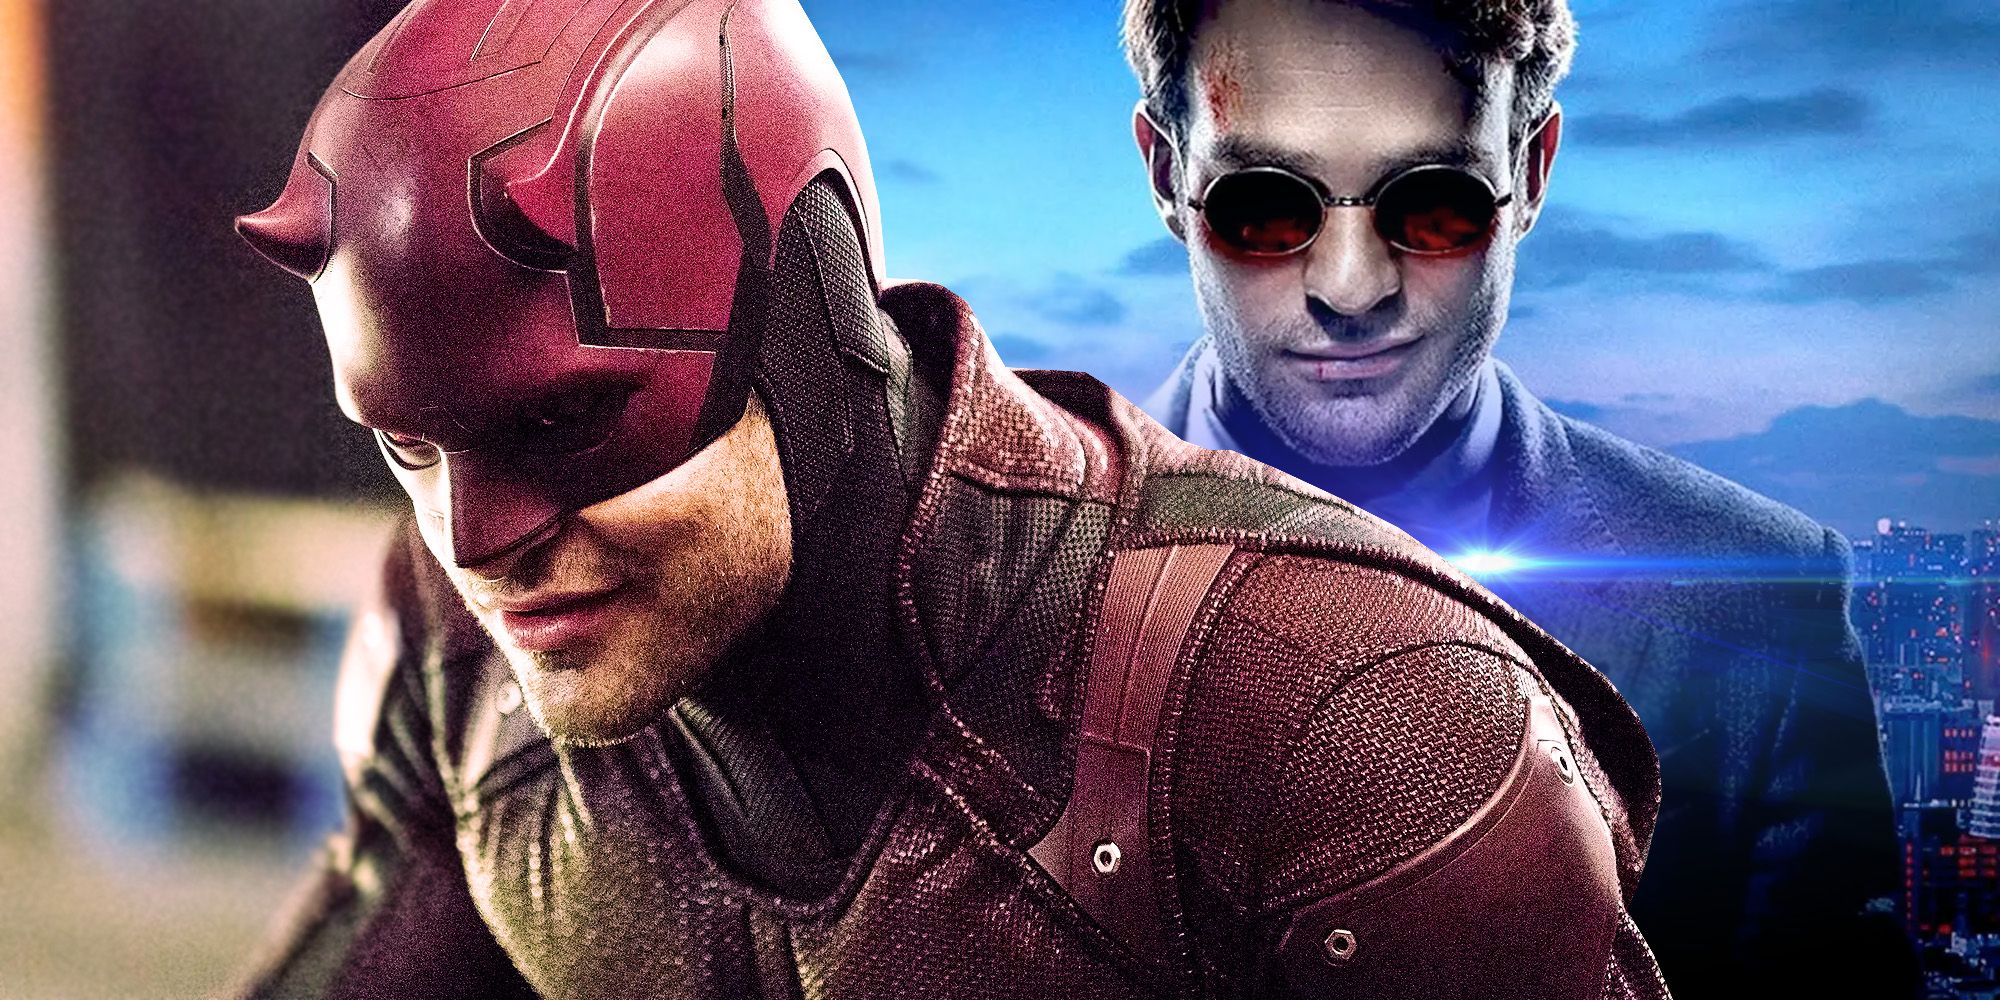 Daredevil MCU Return Could Ruin The Character, Says Charlie Cox